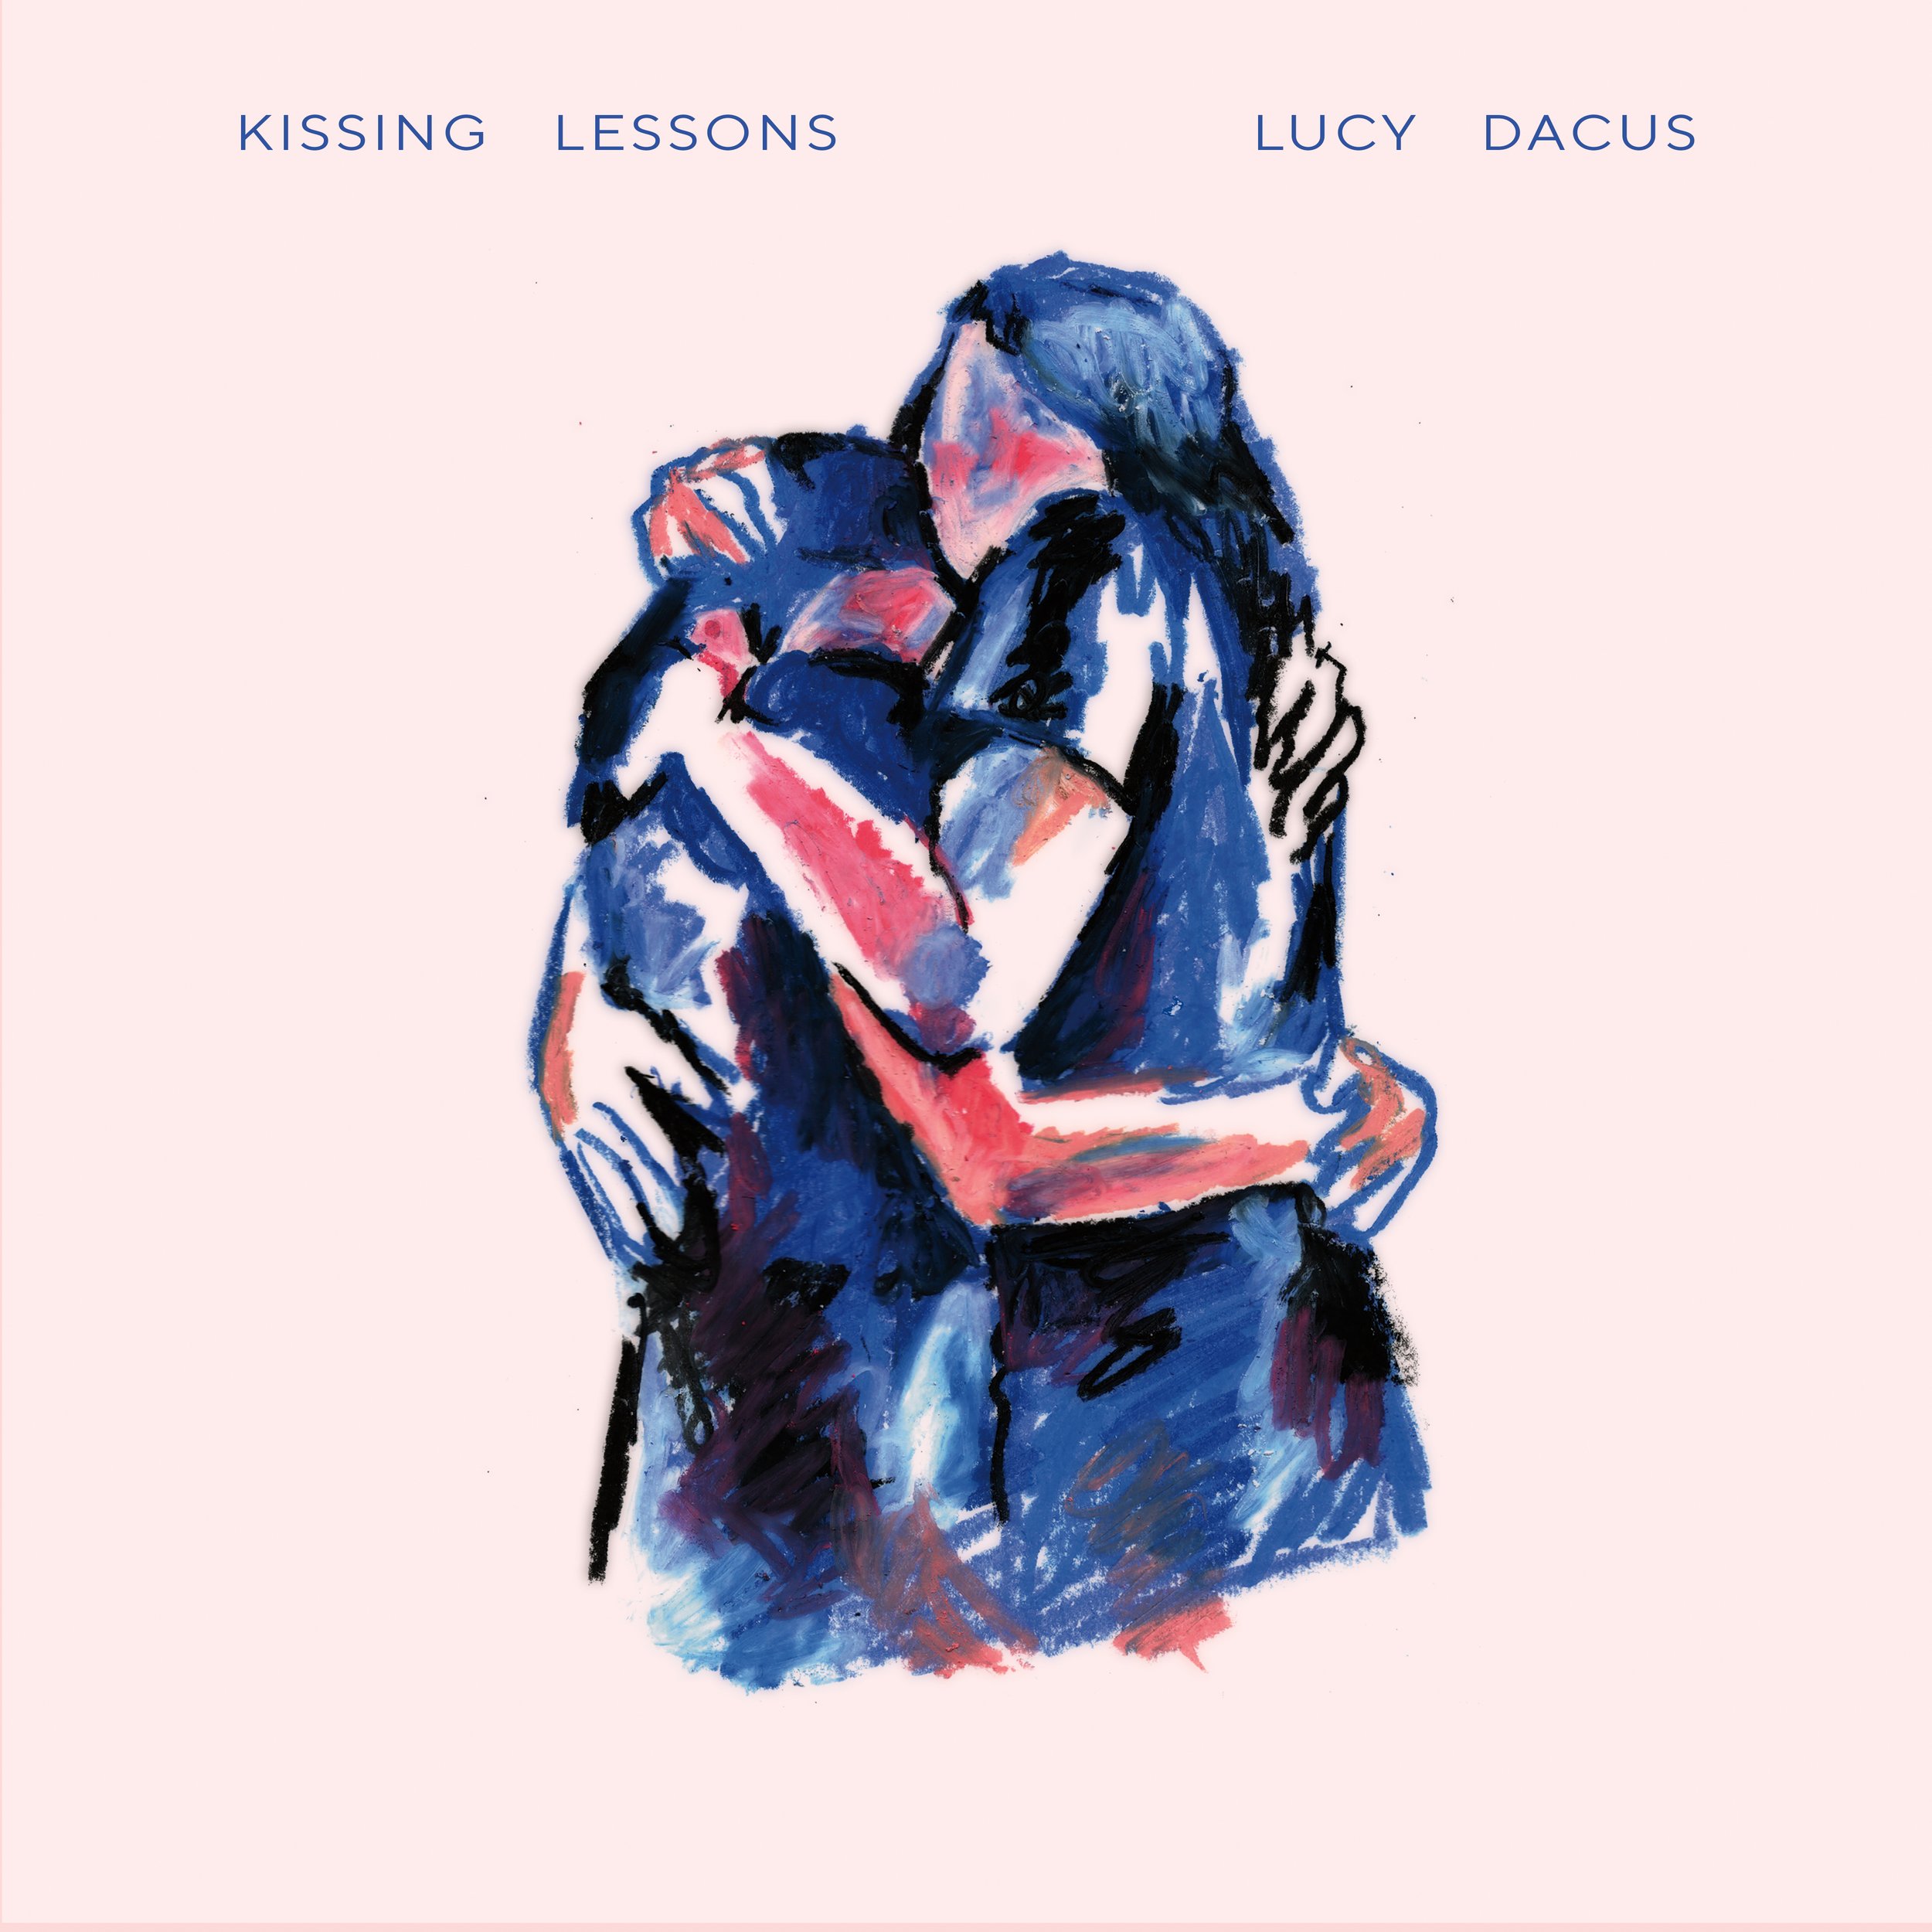 Single Artwork for Lucy Dacus' Kissing Lessons 